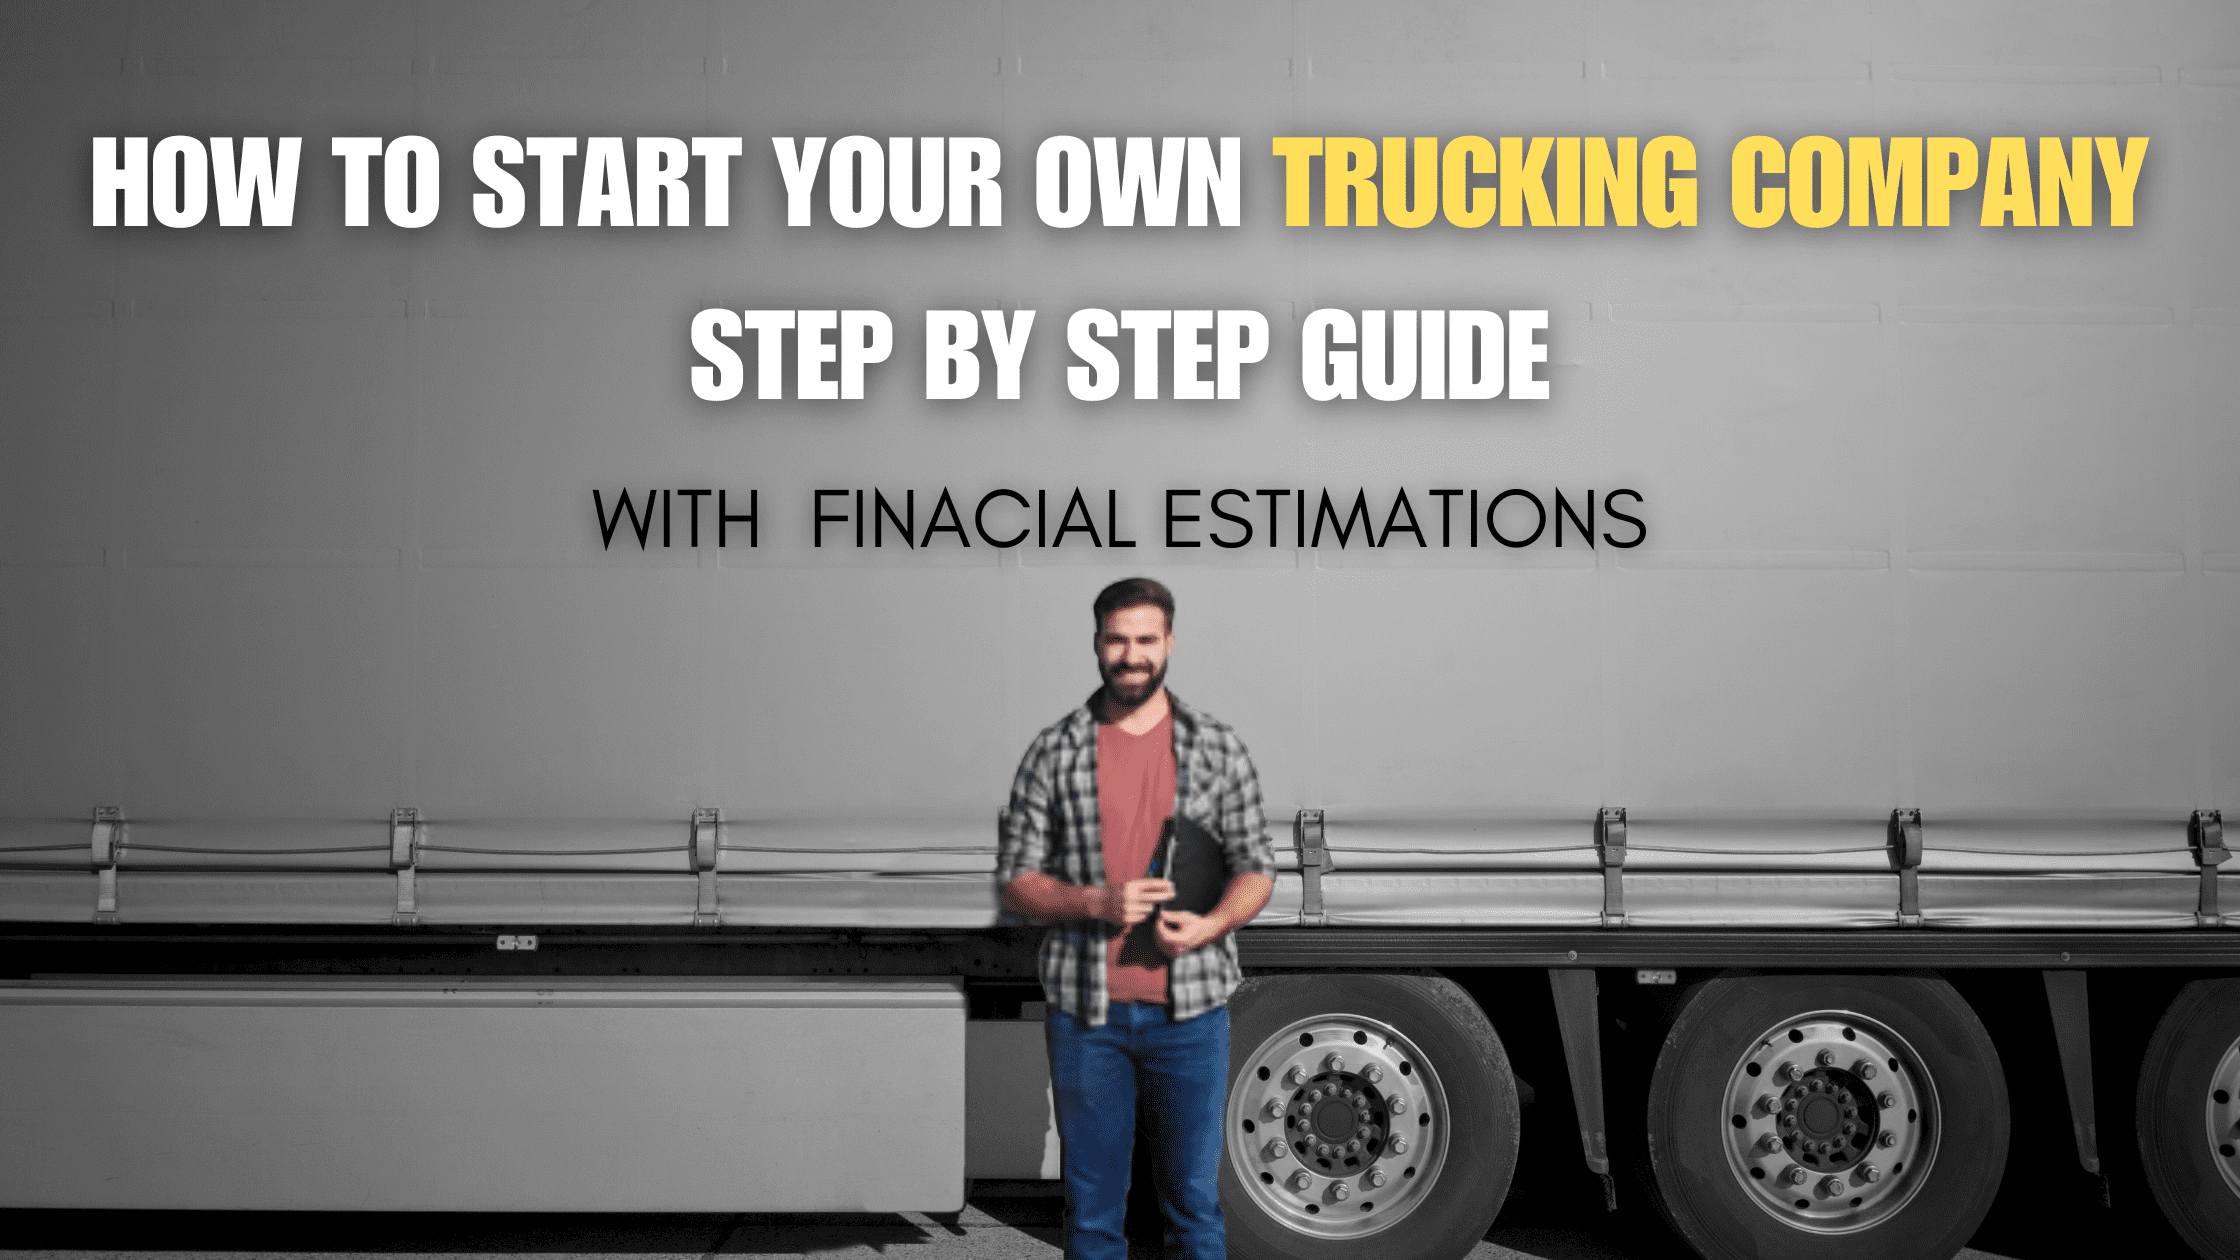 HOW TO START YOUR OWN TRUCKING COMPANY STEP BY STEP GUIDE WITH FINACIAL ESTIMATIONS